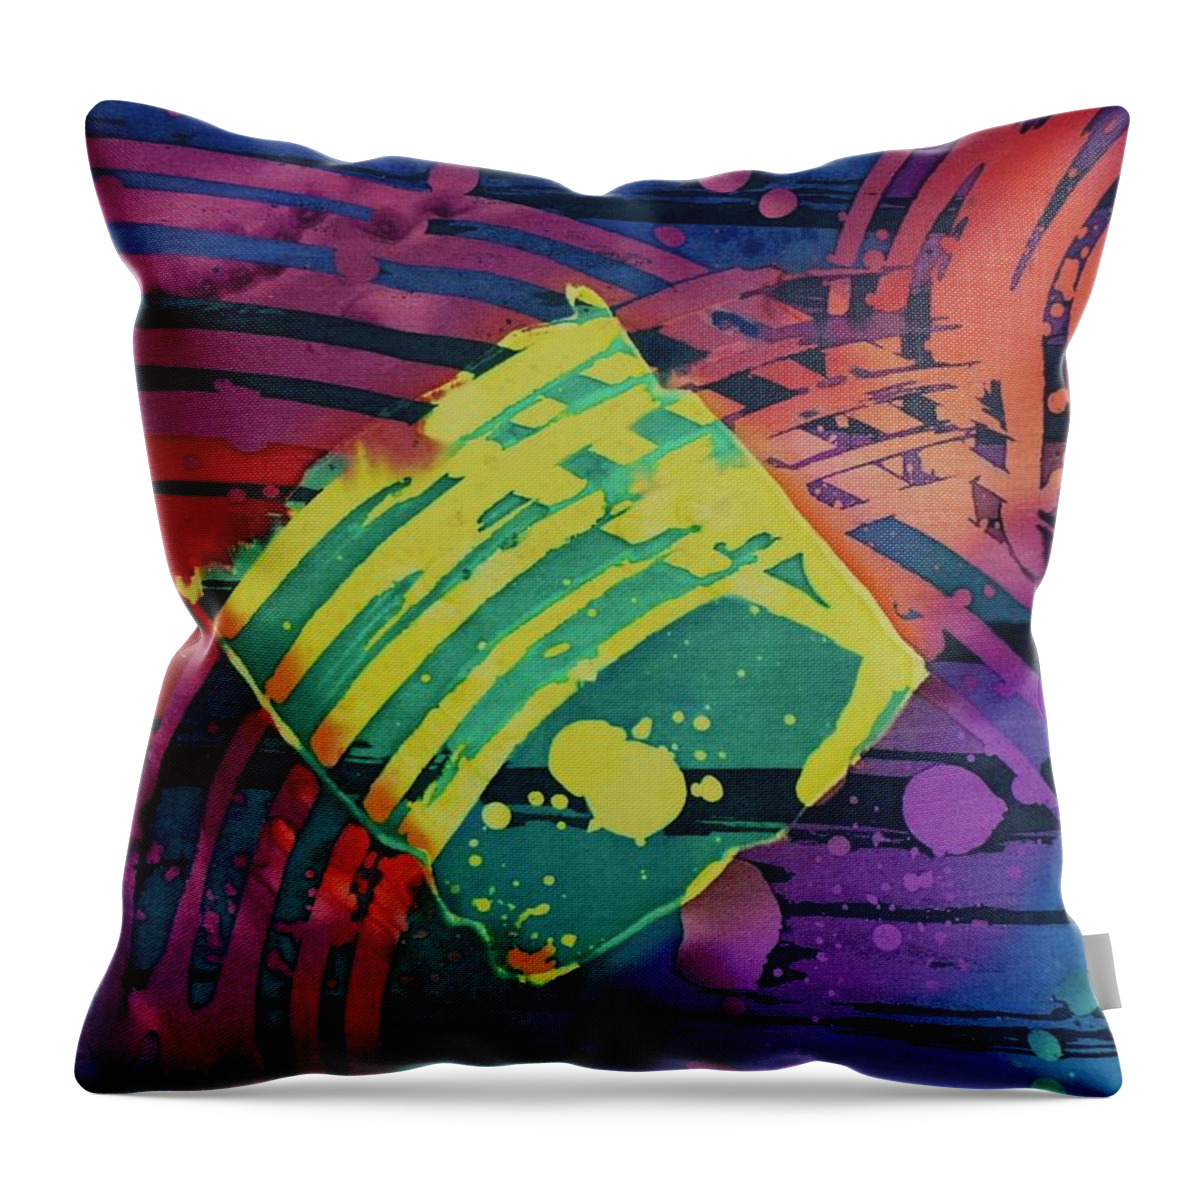 Abstract Throw Pillow featuring the painting Square S And Other Shapes by Barbara Pease